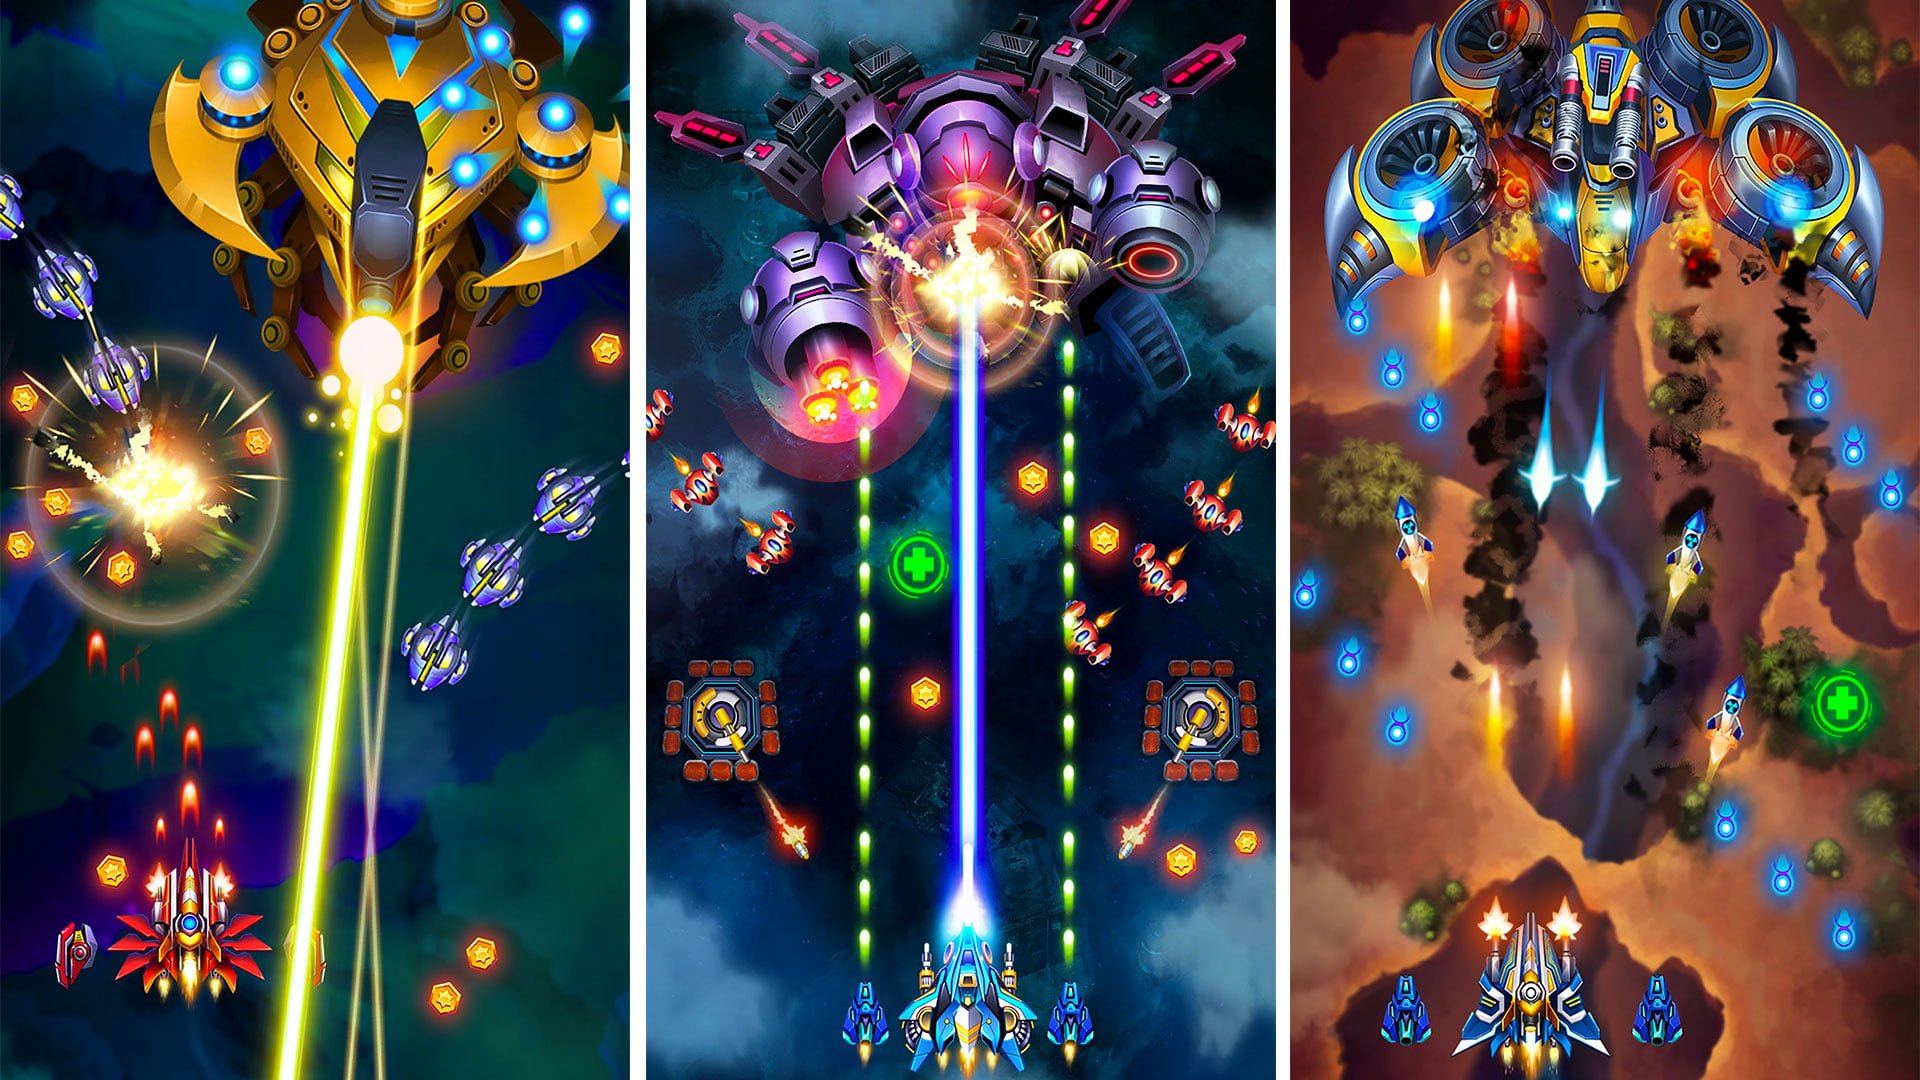 Best Space Shooter Games for iPhone and iPad - 【修改版】天空之冠 Sky Champ: Galaxy Space Shooter v6.2.2 無限寶石、轉蛋物品數量暴增